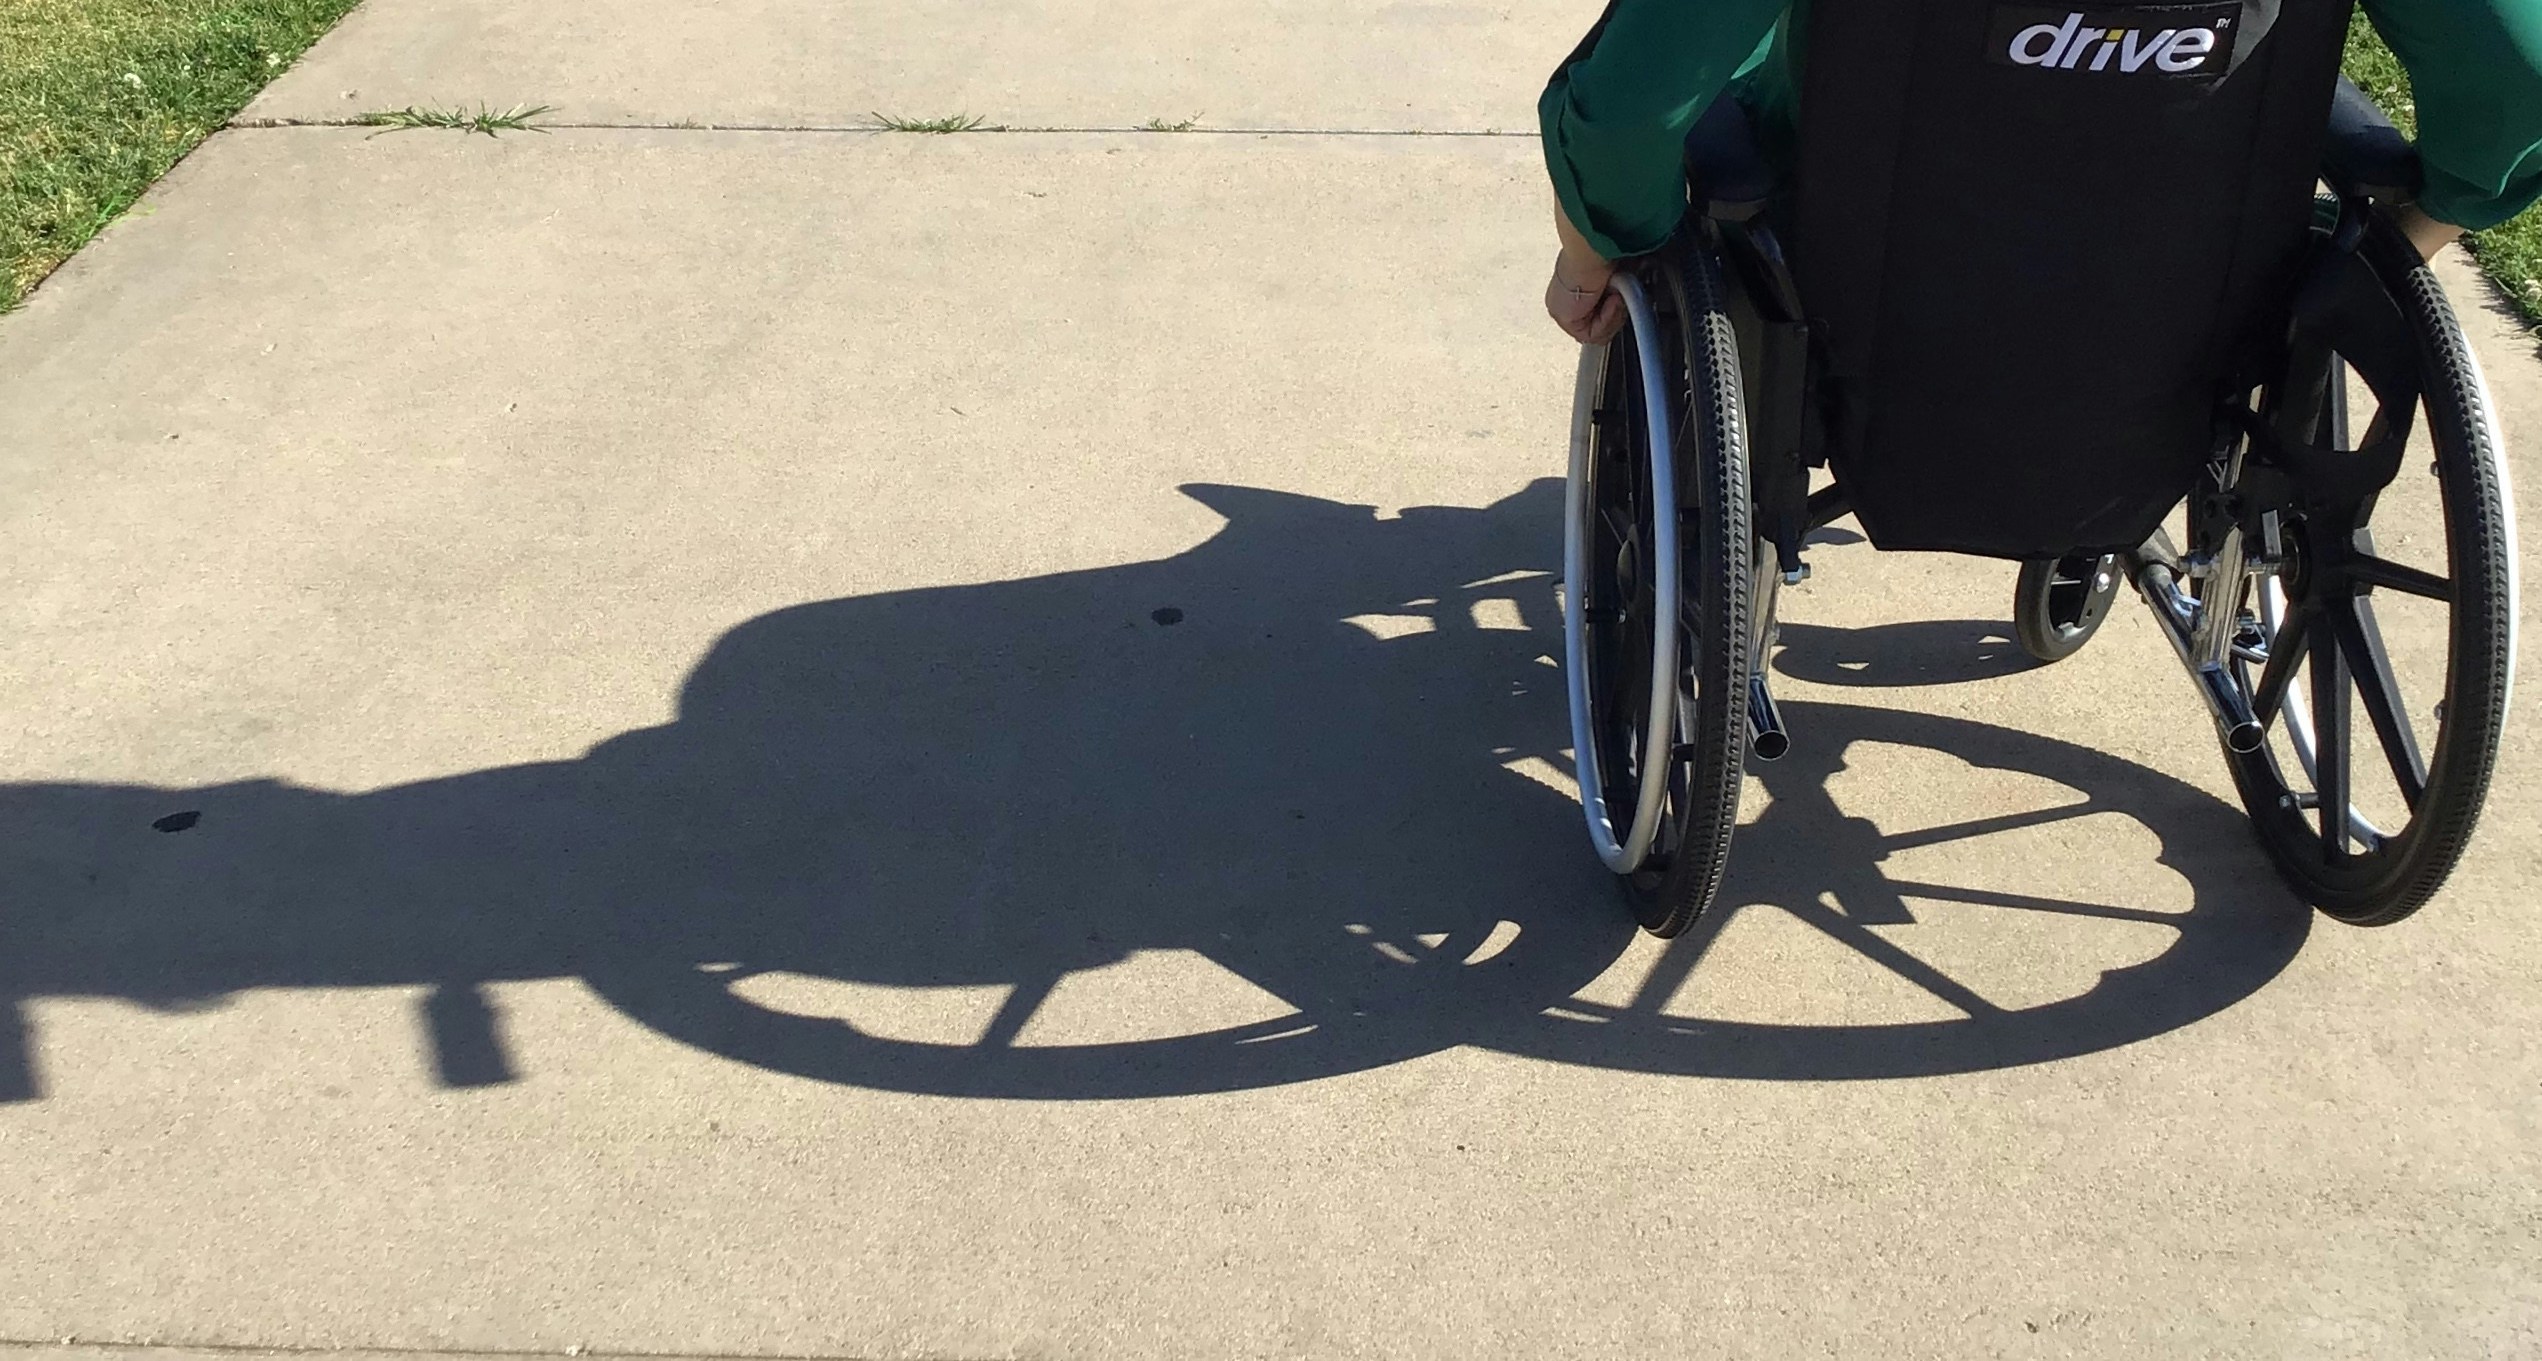 The bottom of a wheelchair with its shadow cast over the path it is being ridden on